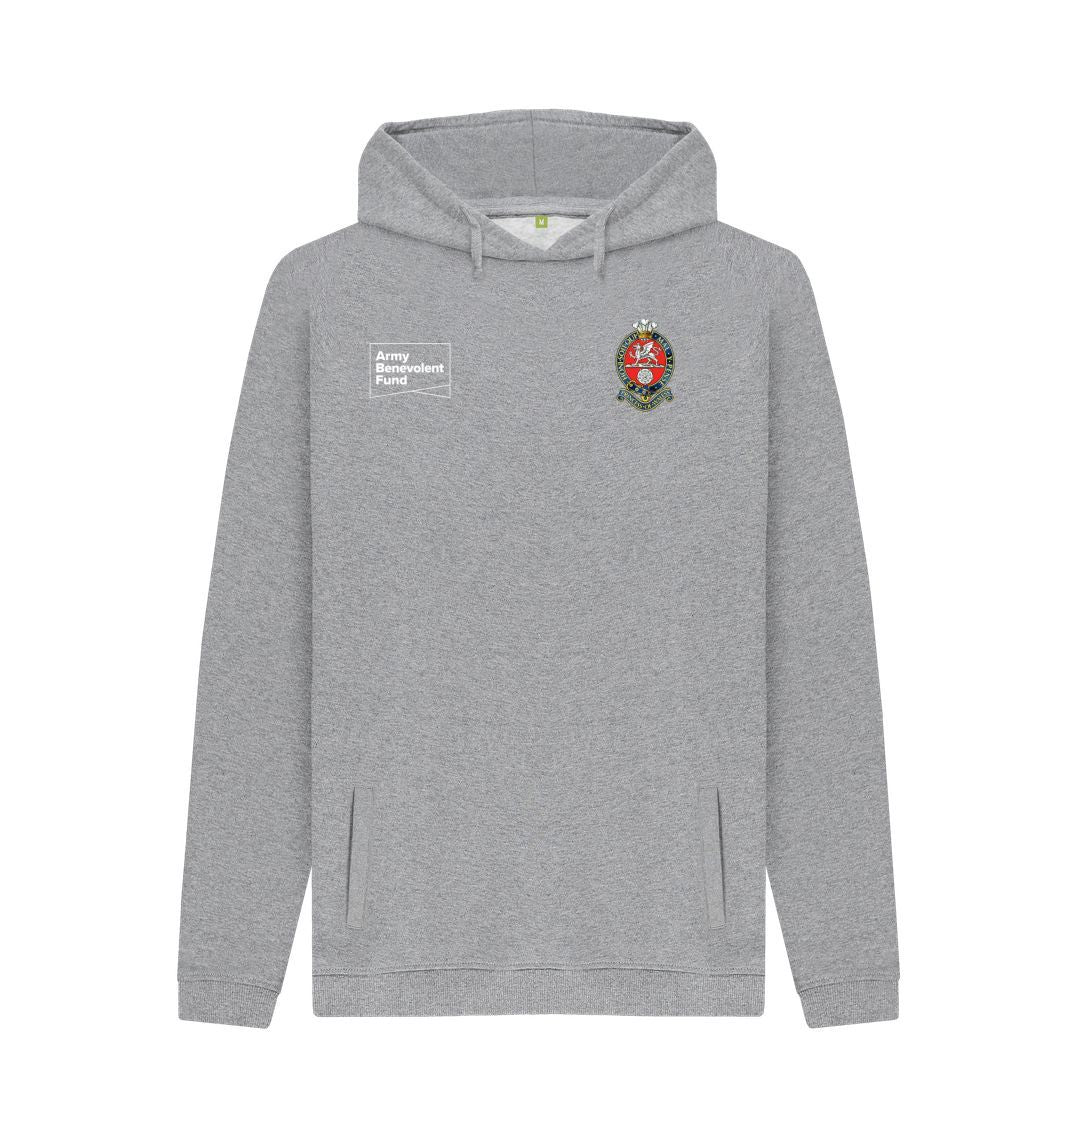 The Princess of Wales's Royal Regiment Unisex Hoodie - Army Benevolent Fund